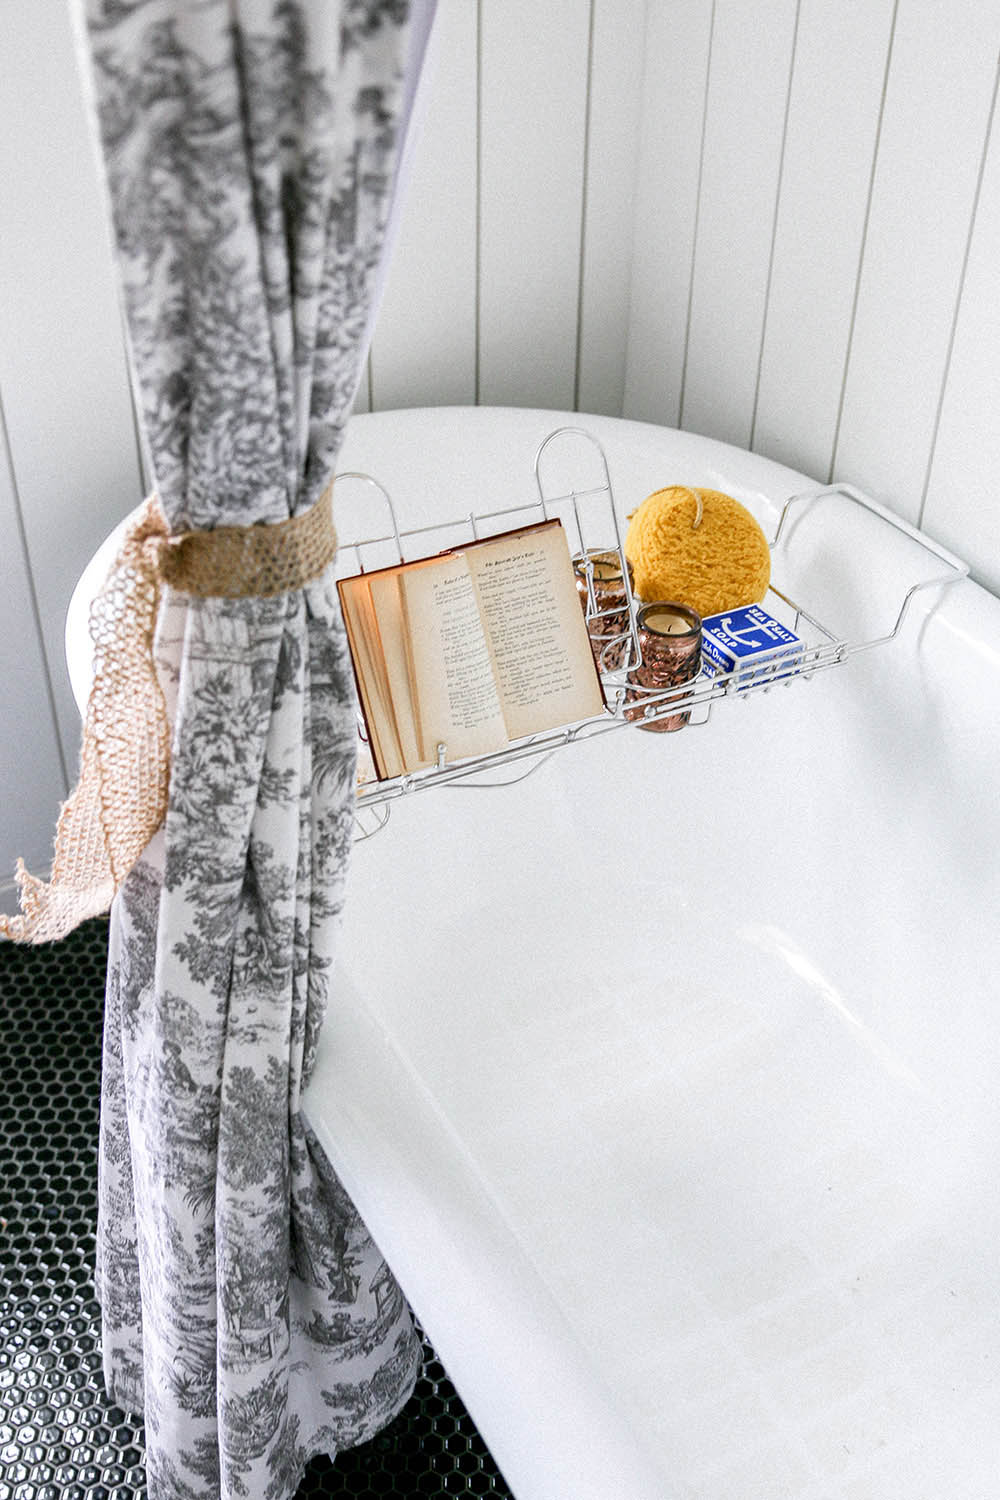 A shower curtain tied to the side of a clawfoot bathtub.